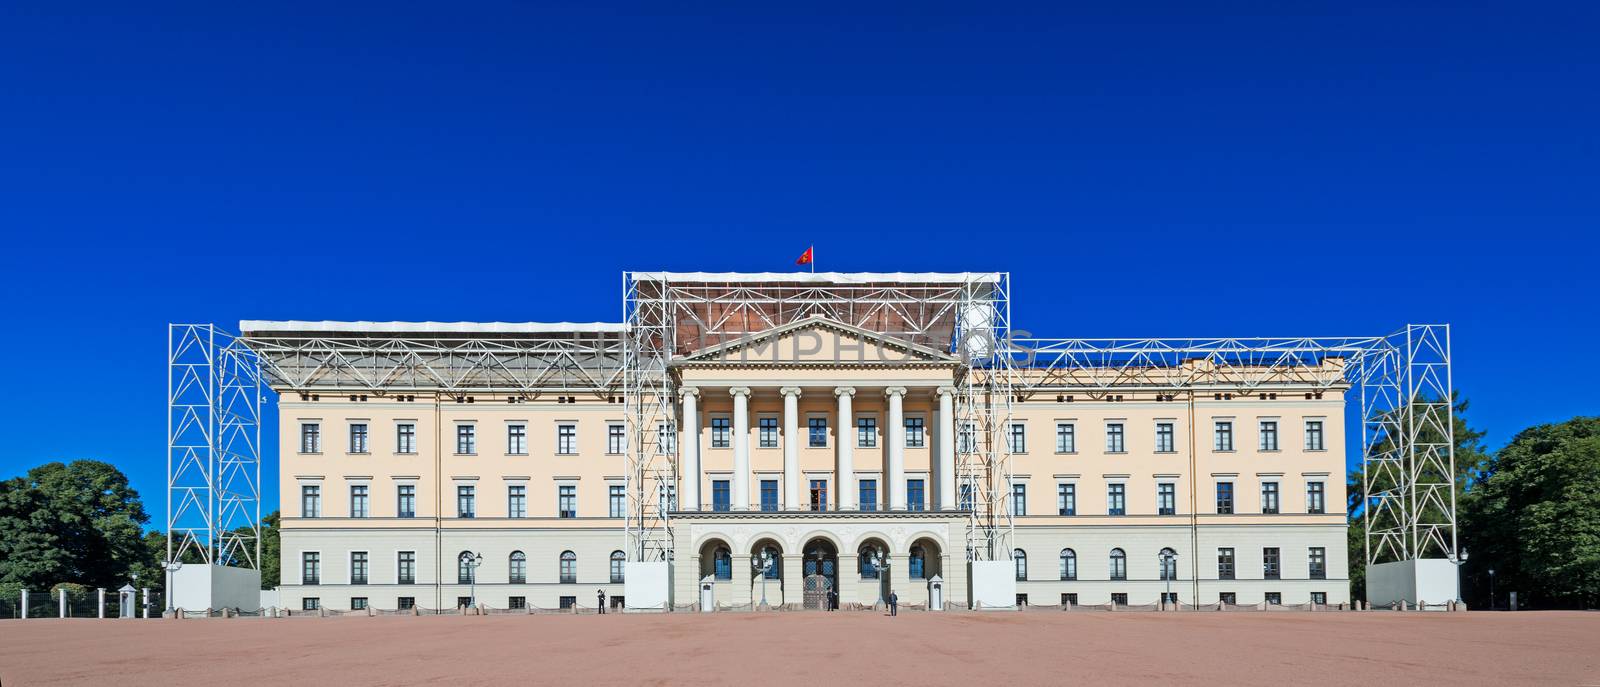 The Royal Palace was built in the first half of the 19th century in Norway. Was renovated in 2012.